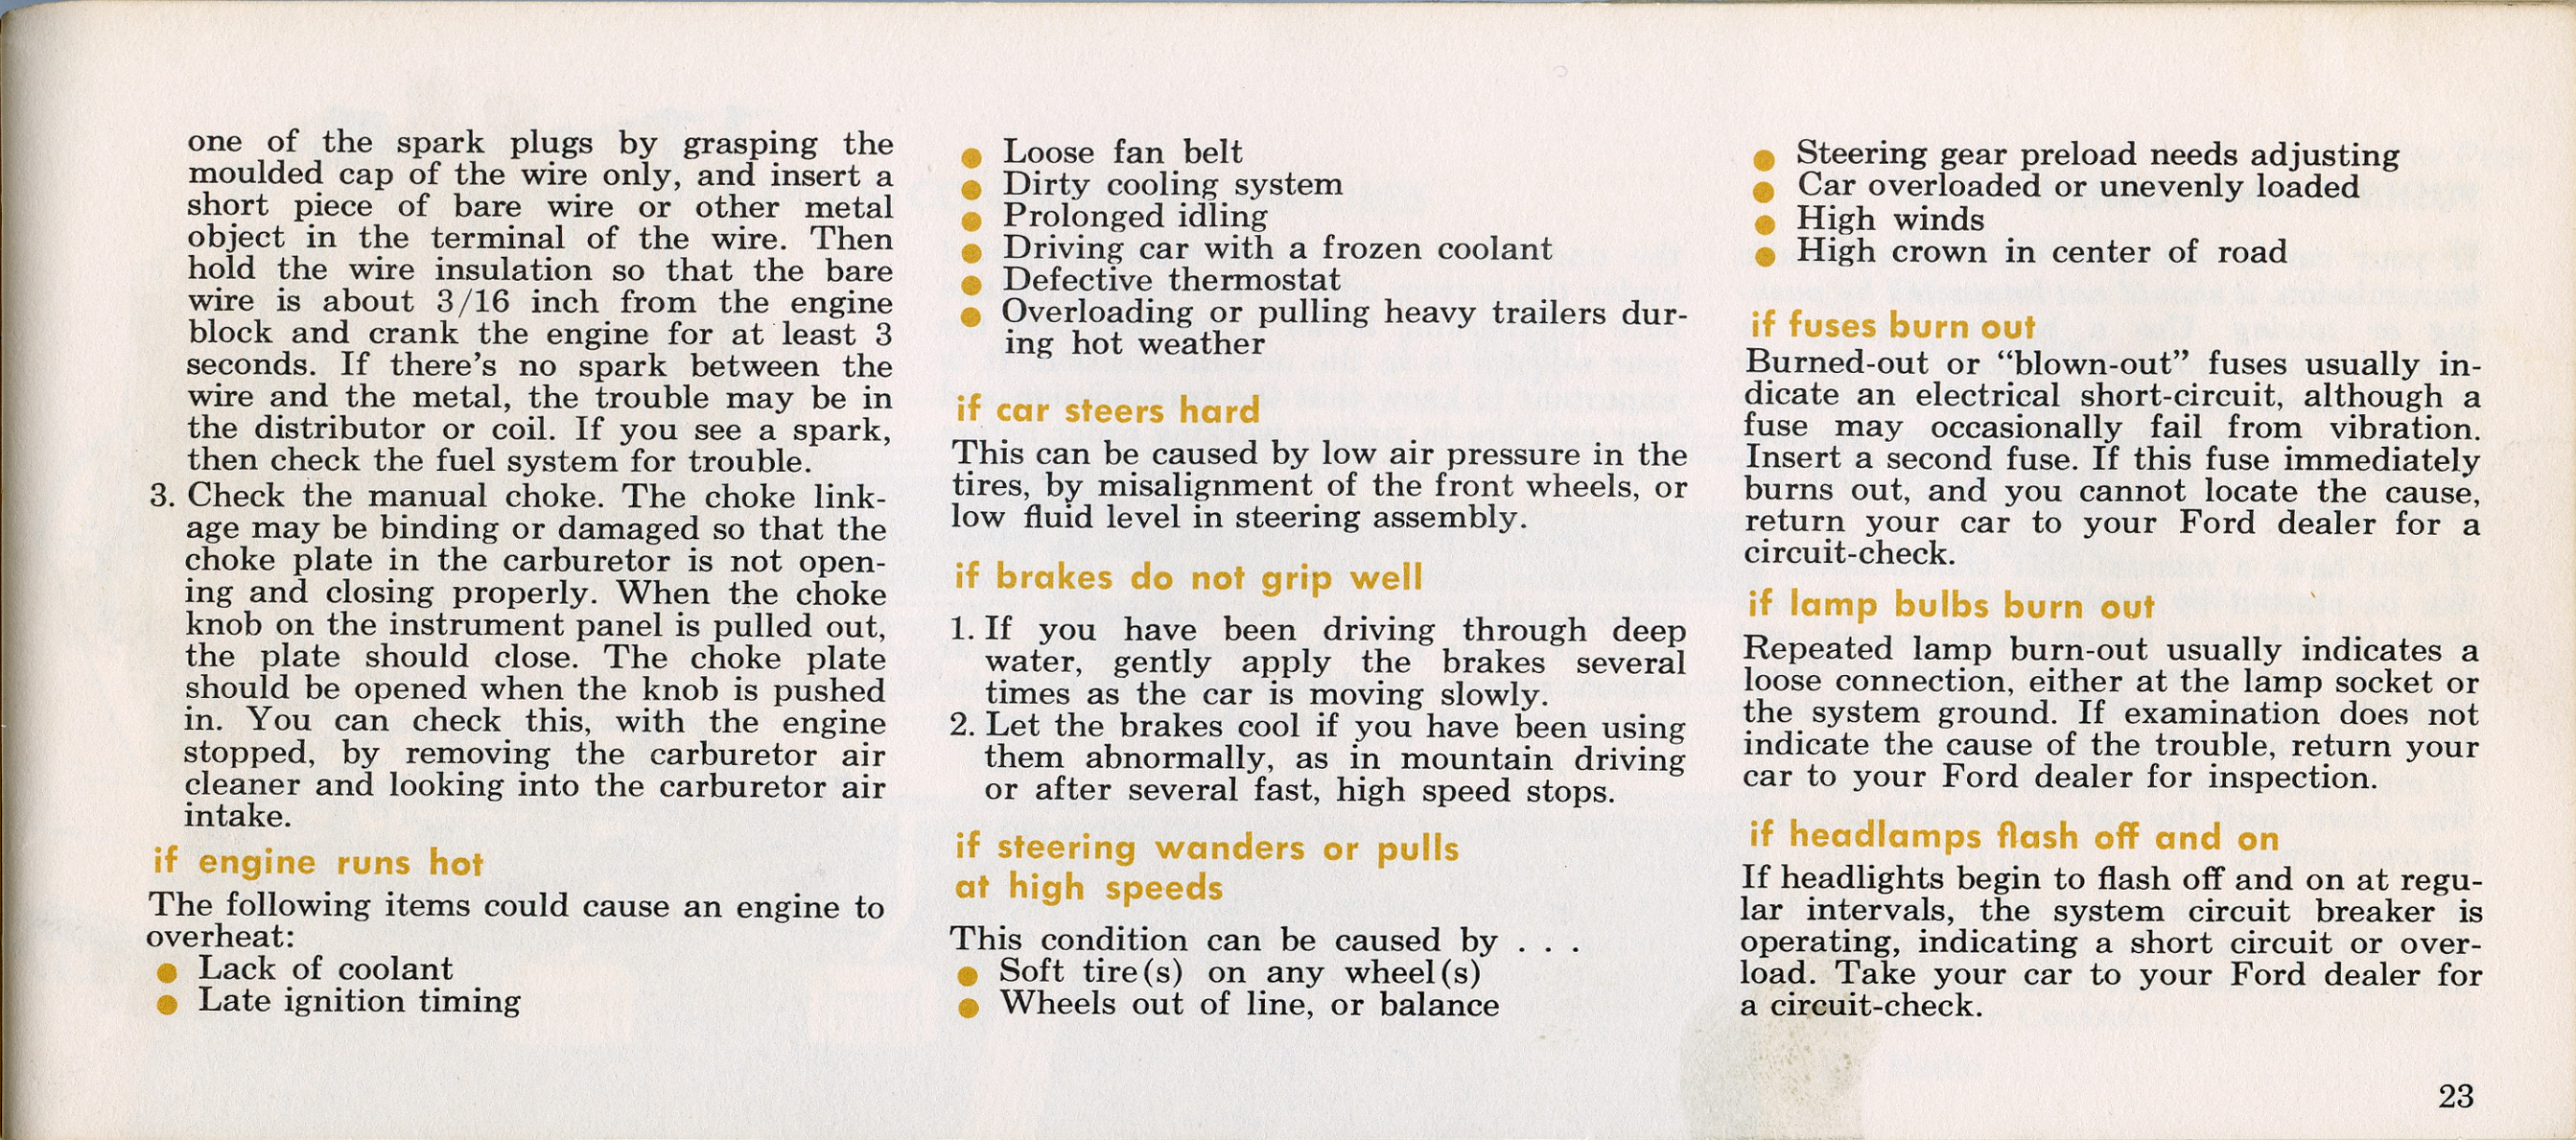 1964_Ford_Falcon_Owners_Manual-23